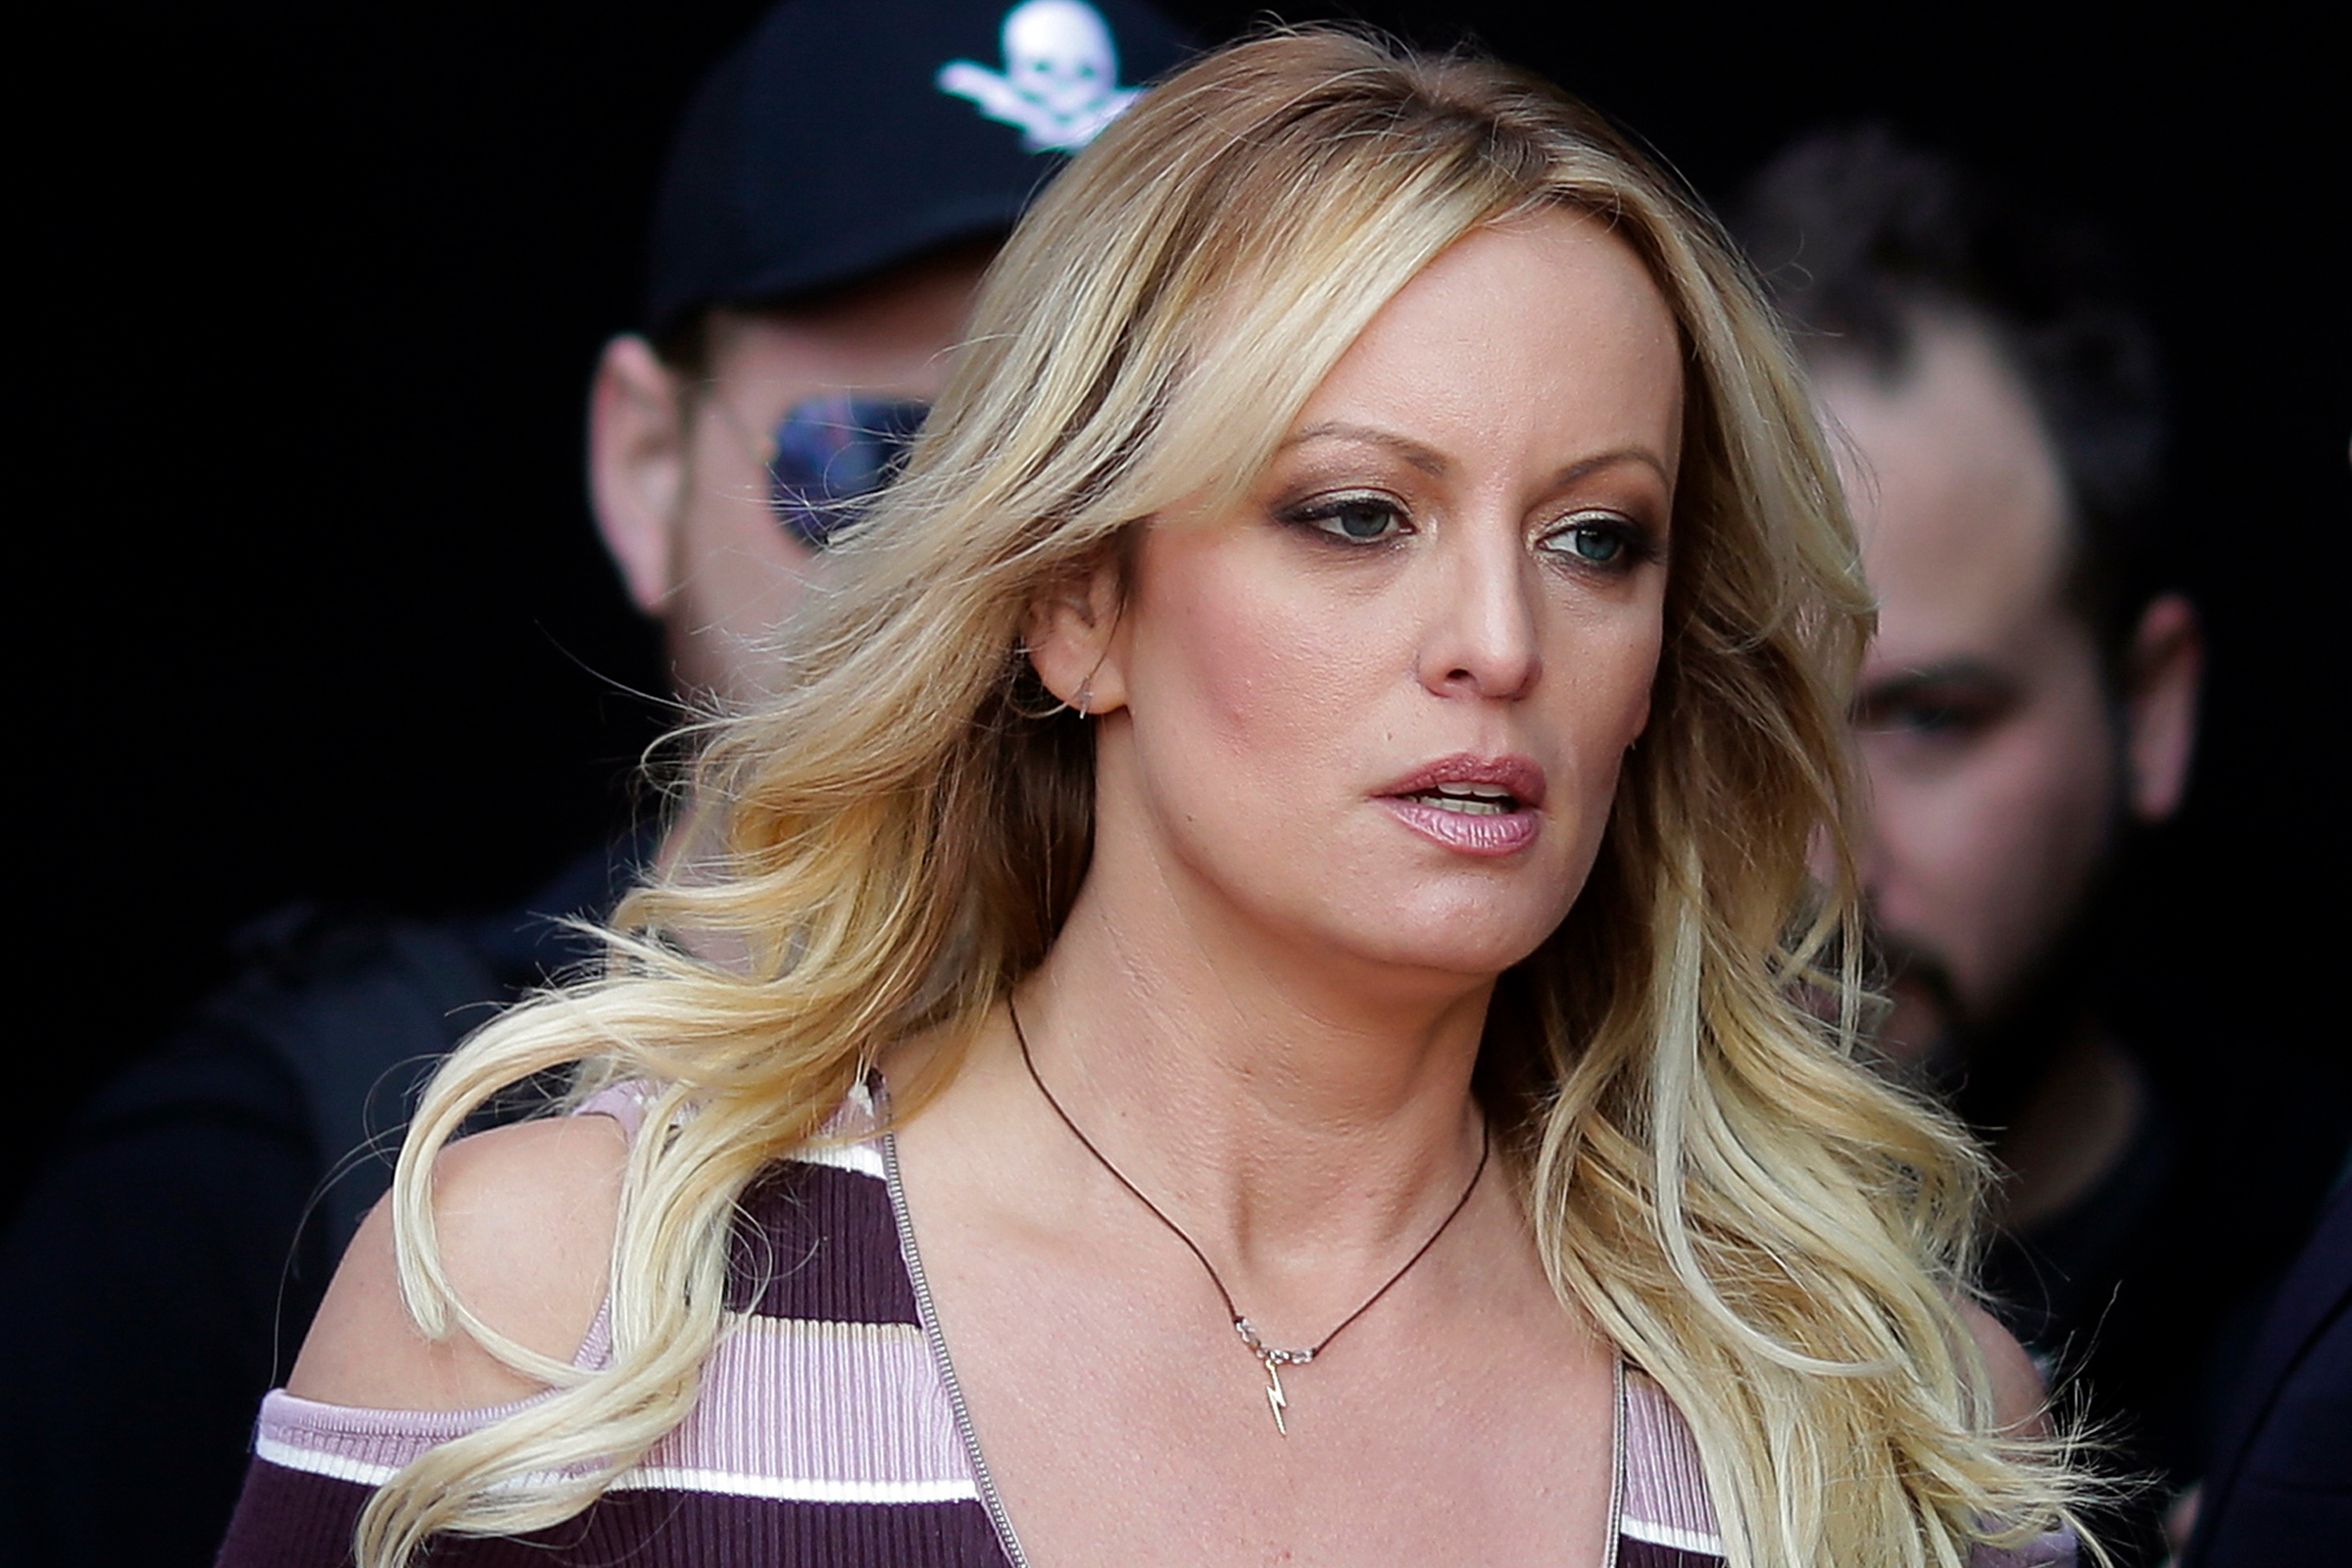 Adult film actress Stormy Daniels arrives for the opening of the adult entertainment fair Venus in Berlin, on Oct. 11, 2018. (Markus Schreiber—AP)